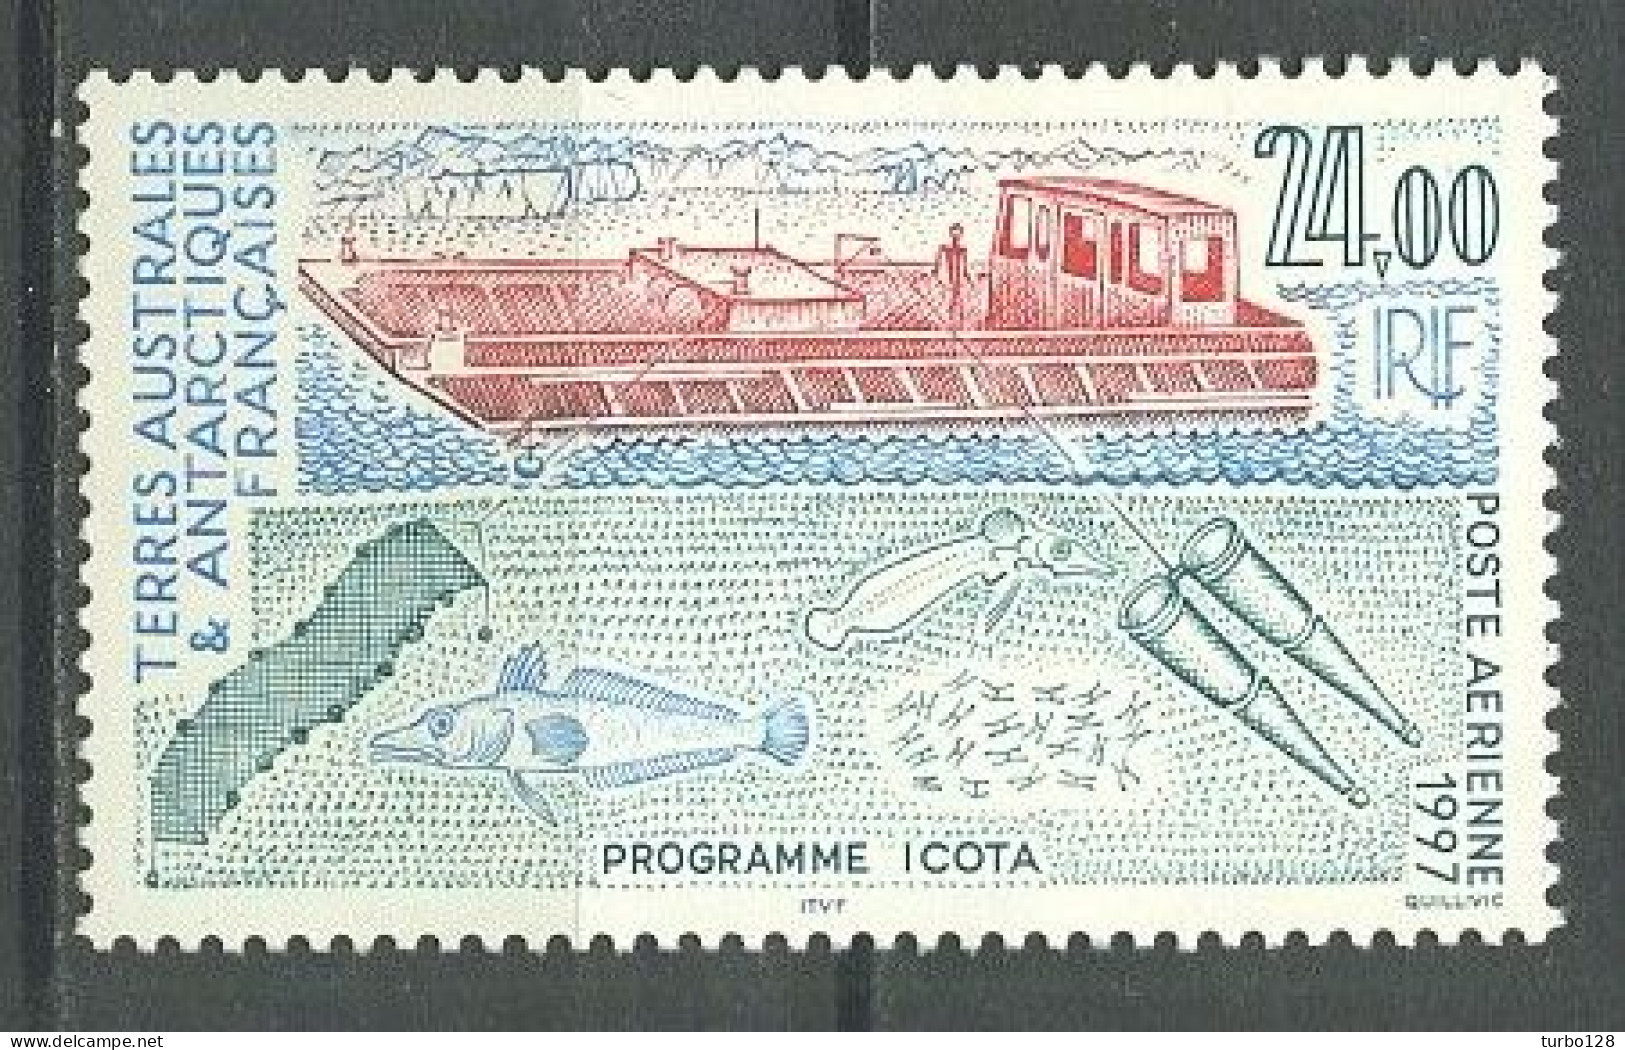 TAAF PA  N° 144 ** Neuf  MNH Superbe C 11,20 &euro; Programme ICOTA - Bateaux Boats Ships Barge Et Filets - Luchtpost